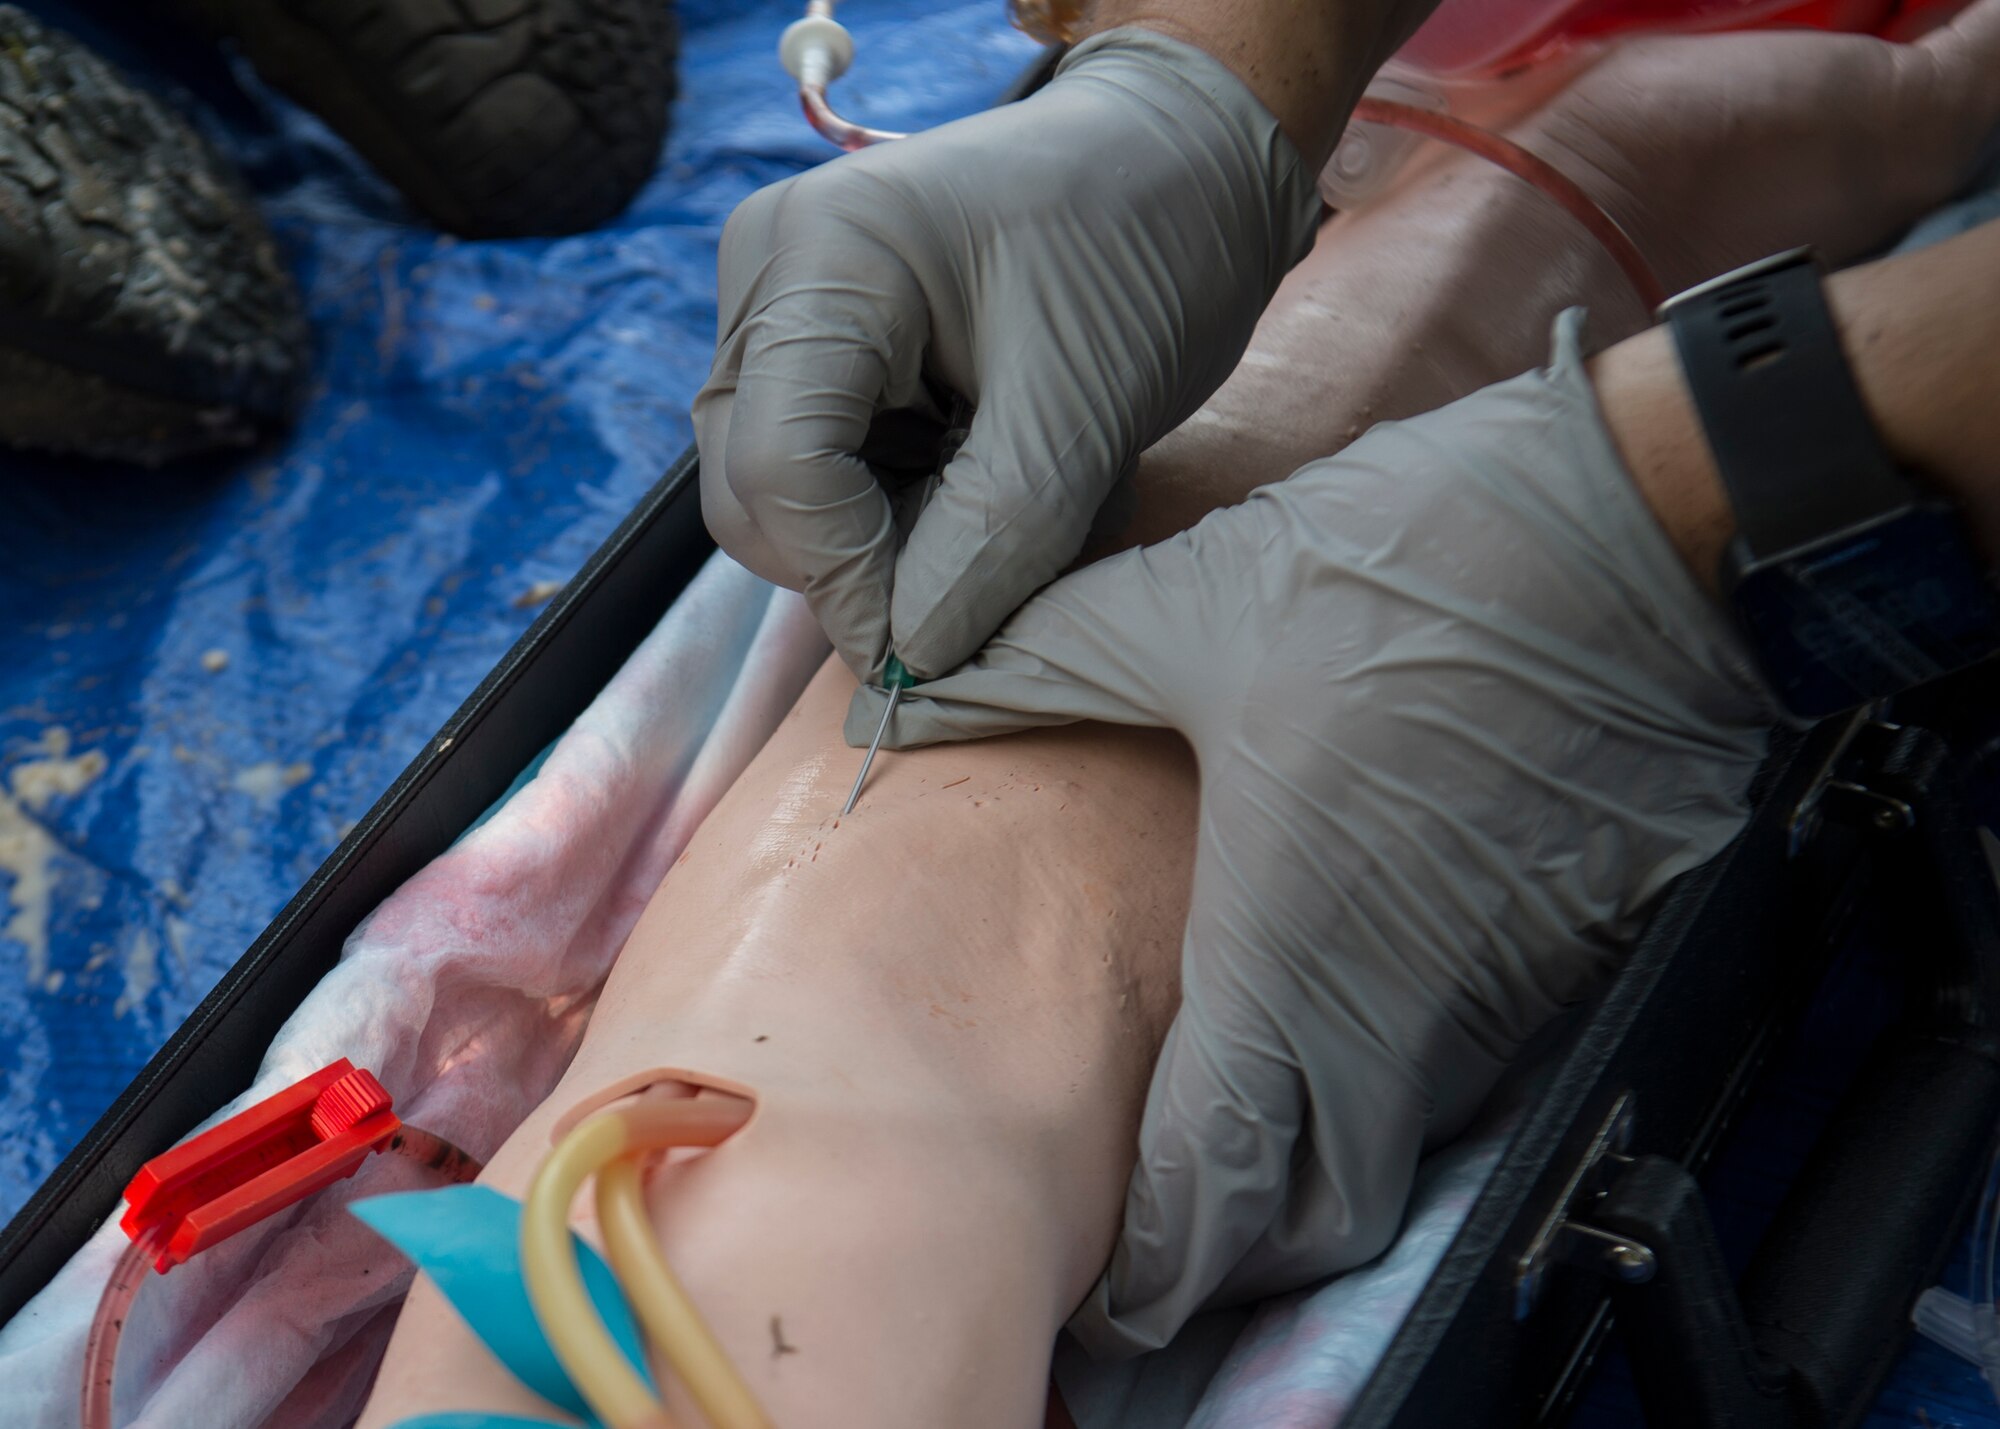 A medic inserts an IV into a training dummy during the U.S. Air Forces in Europe EMT Rodeo at Ramstein Air Base, Germany, July 23, 2019. Prosthetic limbs, makeup and imitation blood were used to make scenarios as real as possible. (U.S. Air Force photo by Staff Sgt. Kirby Turbak)